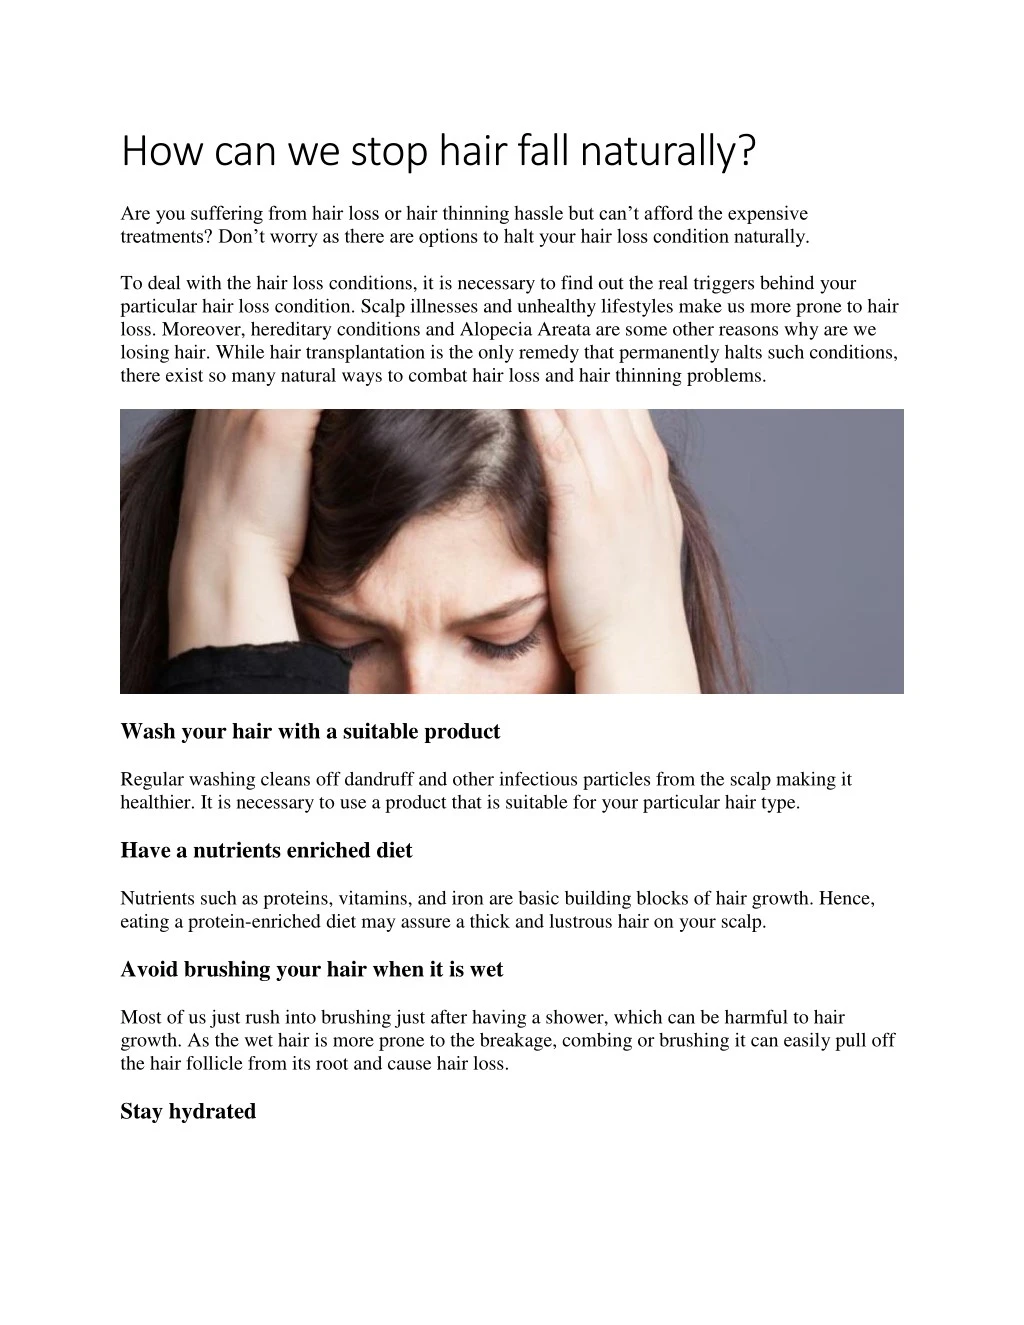 how can we stop hair fall naturally